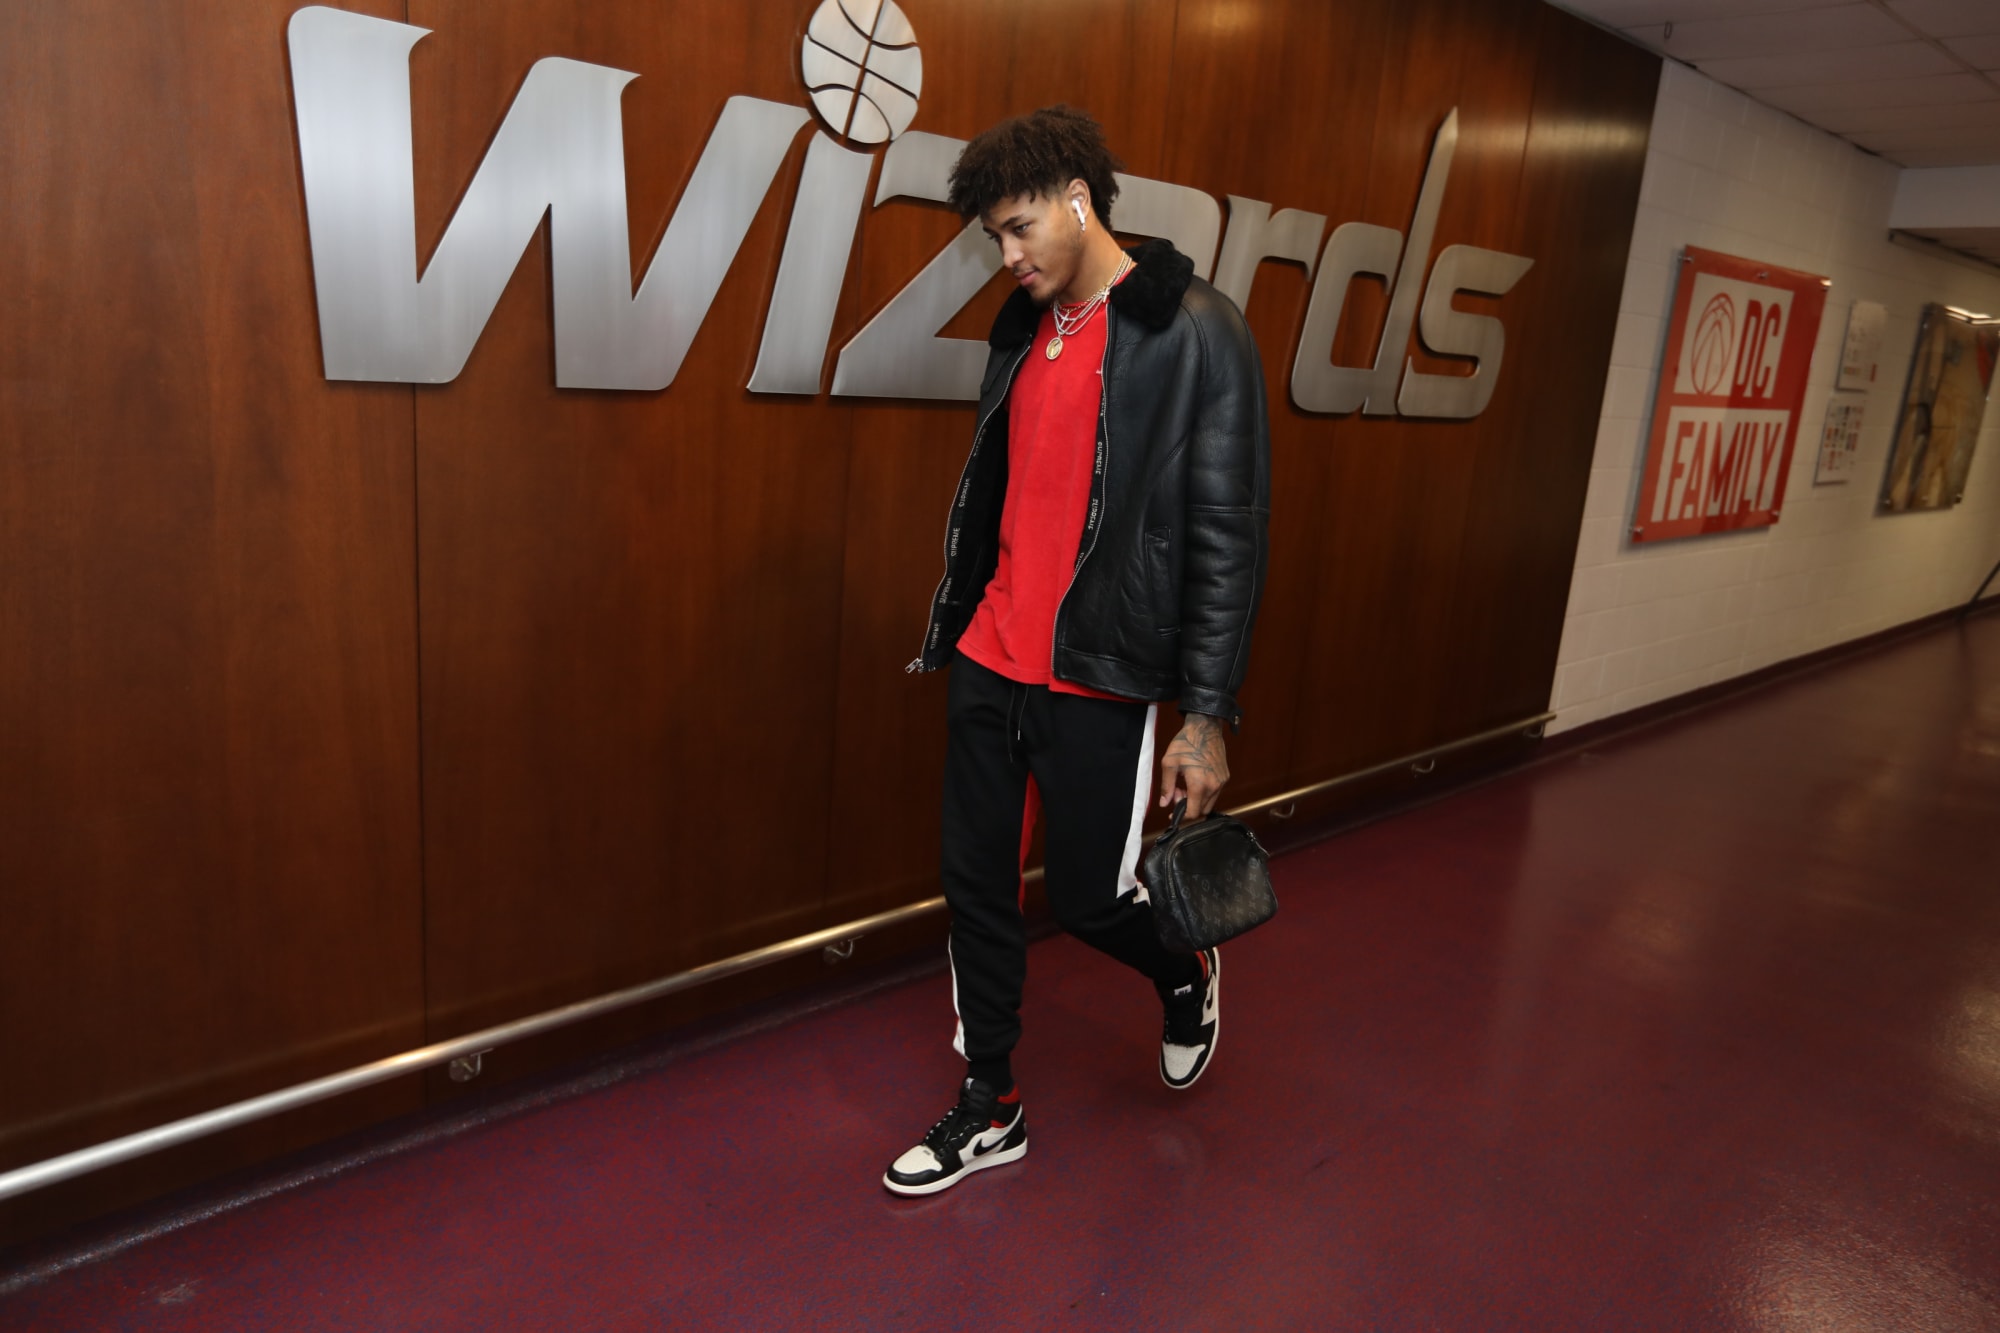 Washington Wizards: Kelly Oubre Jr. signs shoe deal with Converse